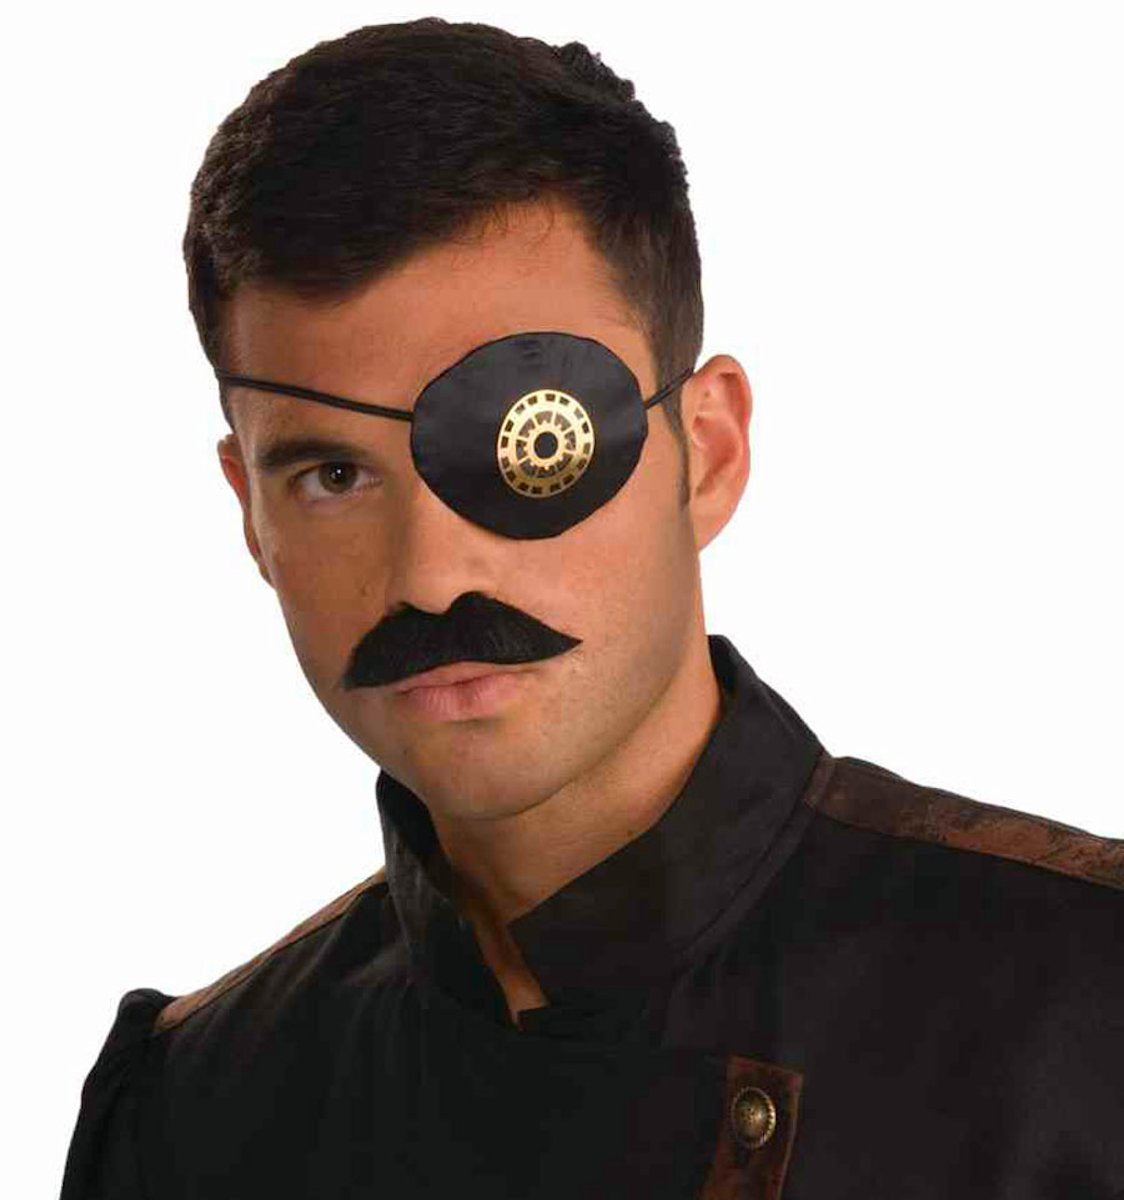 Steampunk Eyepatch Victorian Industrial Science Fiction Apocalyptic costume